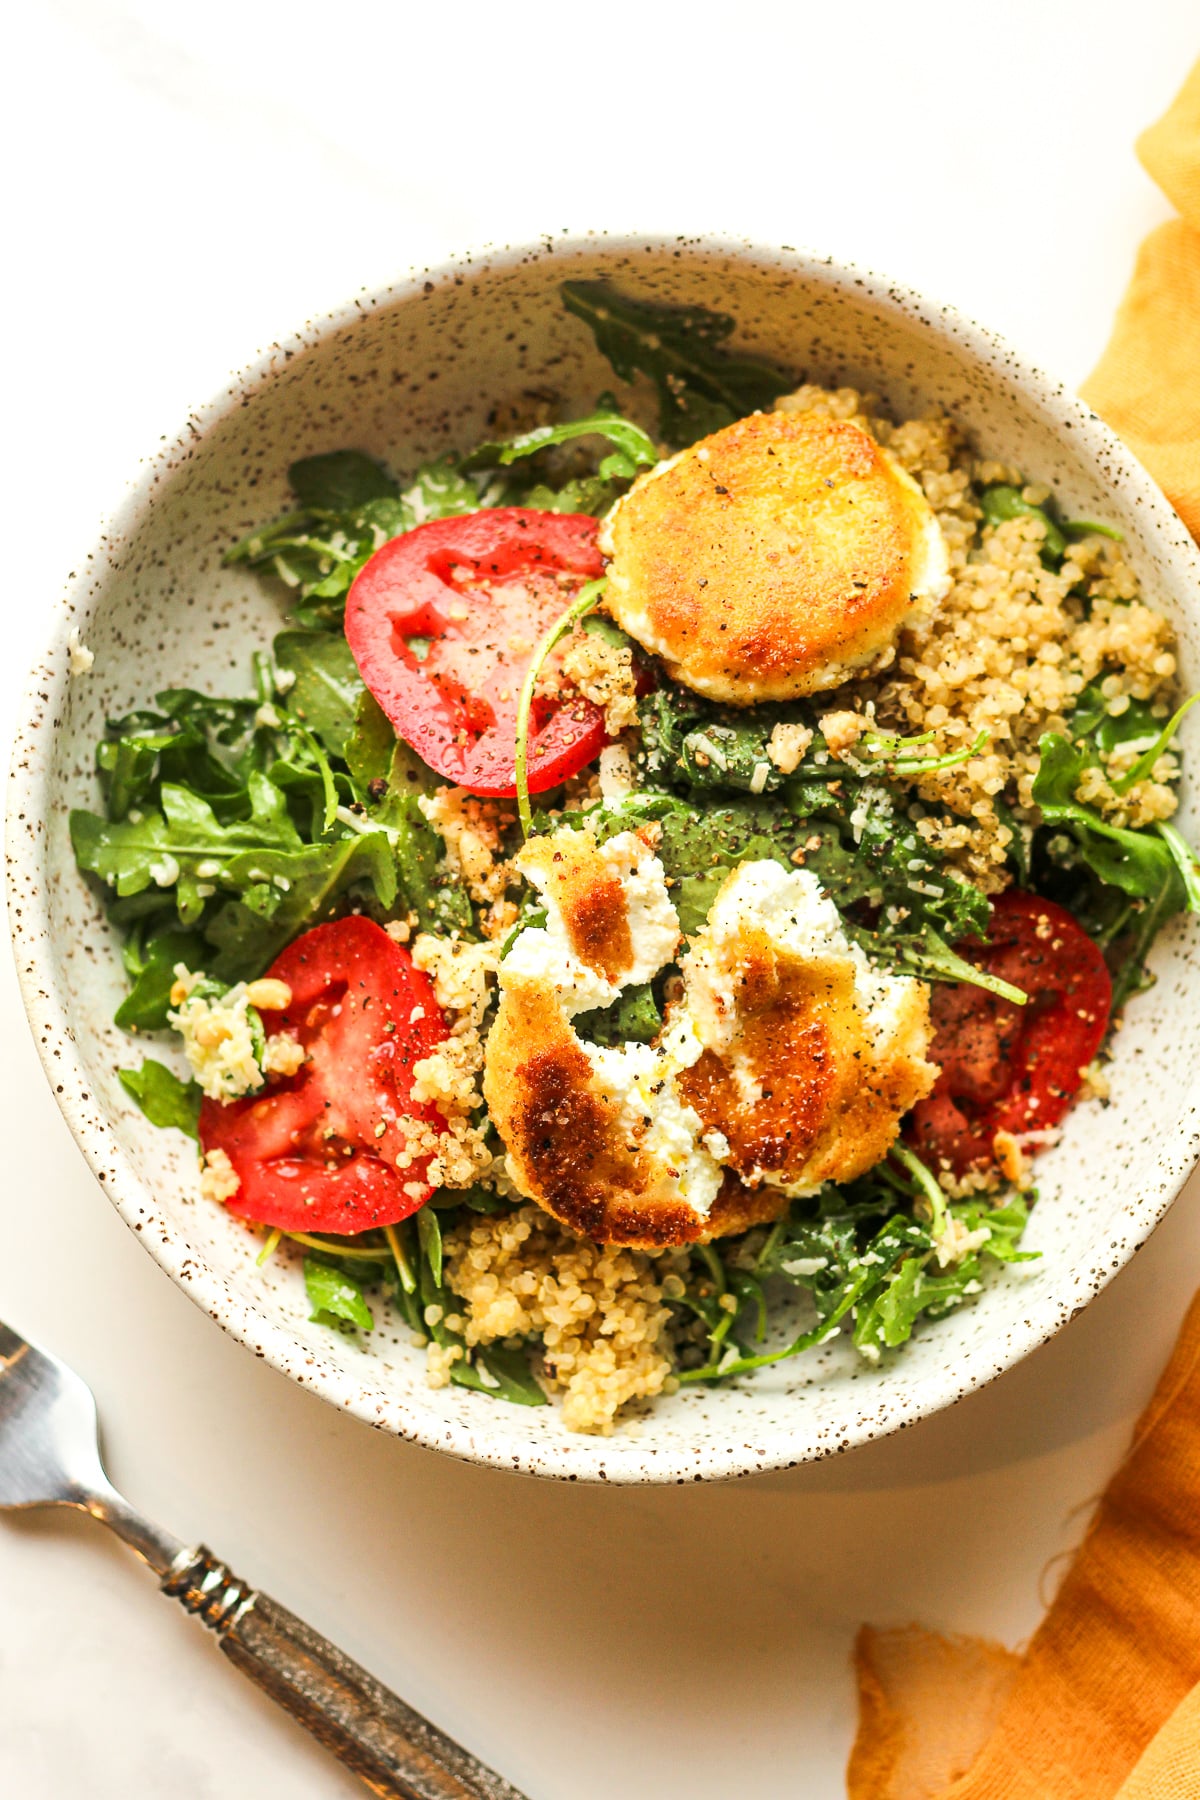 A bowl of arugula and quinoa salad with fried goat cheese.